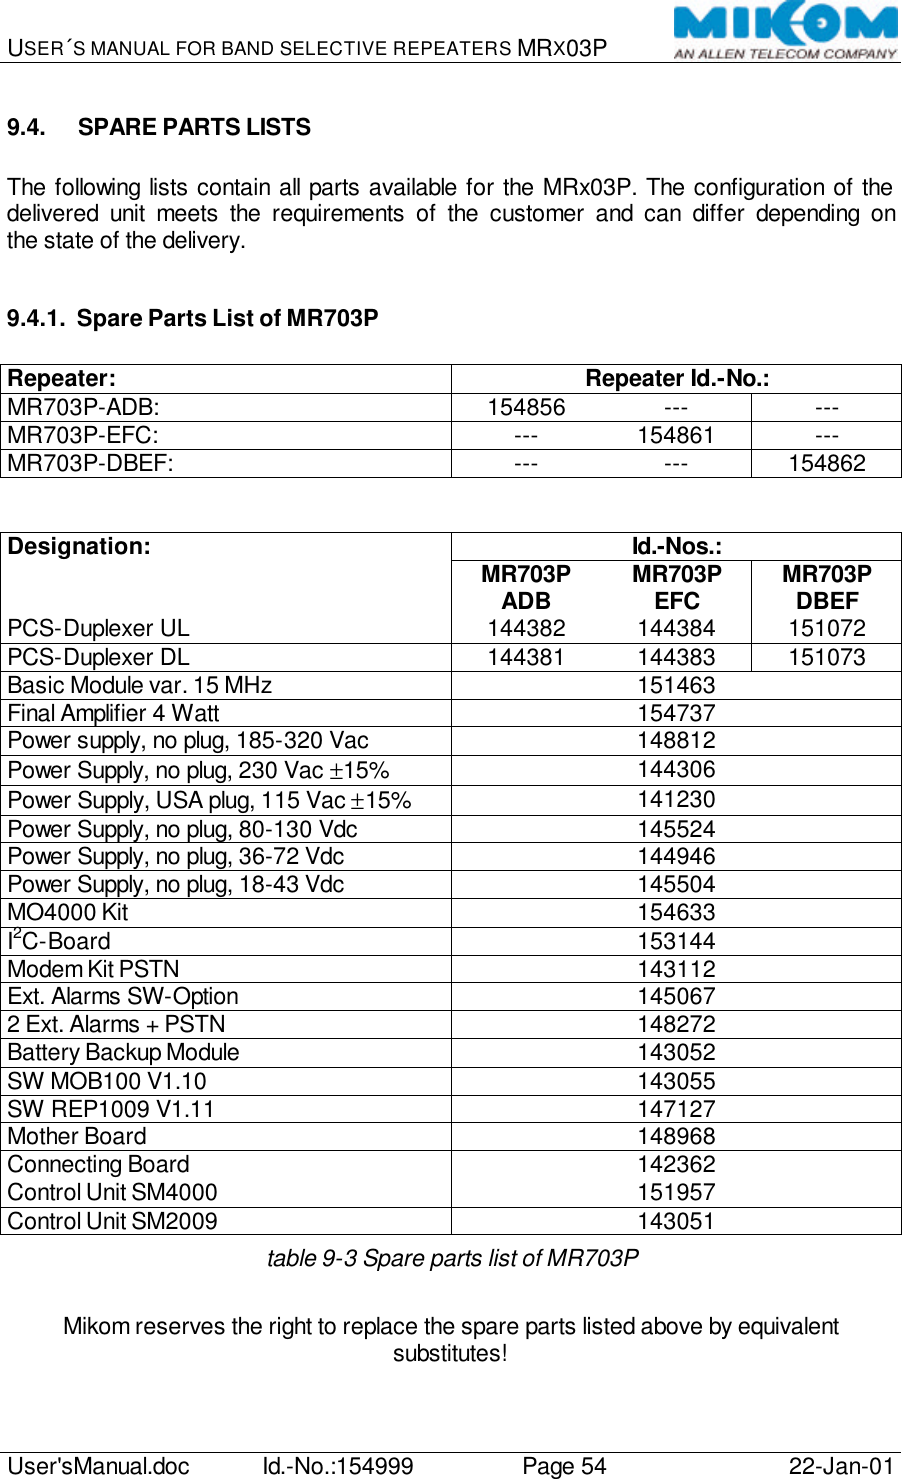 USER´S MANUAL FOR BAND SELECTIVE REPEATERS MRX03P   User&apos;sManual.doc Id.-No.:154999 Page 54 22-Jan-01  9.4. SPARE PARTS LISTS  The following lists contain all parts available for the MRx03P. The configuration of the delivered unit meets the requirements of the customer and can differ depending on the state of the delivery.  9.4.1. Spare Parts List of MR703P  Repeater: Repeater Id.-No.: MR703P-ADB: 154856 --- --- MR703P-EFC: --- 154861 --- MR703P-DBEF: --- --- 154862   Id.-Nos.: Designation: MR703P ADB MR703P EFC MR703P DBEF PCS-Duplexer UL 144382 144384 151072 PCS-Duplexer DL 144381 144383 151073 Basic Module var. 15 MHz 151463 Final Amplifier 4 Watt 154737 Power supply, no plug, 185-320 Vac 148812 Power Supply, no plug, 230 Vac ±15% 144306 Power Supply, USA plug, 115 Vac ±15% 141230 Power Supply, no plug, 80-130 Vdc 145524 Power Supply, no plug, 36-72 Vdc 144946 Power Supply, no plug, 18-43 Vdc 145504 MO4000 Kit 154633 I2C-Board 153144 Modem Kit PSTN 143112 Ext. Alarms SW-Option 145067 2 Ext. Alarms + PSTN 148272 Battery Backup Module 143052 SW MOB100 V1.10 143055 SW REP1009 V1.11 147127 Mother Board 148968 Connecting Board 142362 Control Unit SM4000 151957 Control Unit SM2009 143051 table 9-3 Spare parts list of MR703P  Mikom reserves the right to replace the spare parts listed above by equivalent substitutes! 